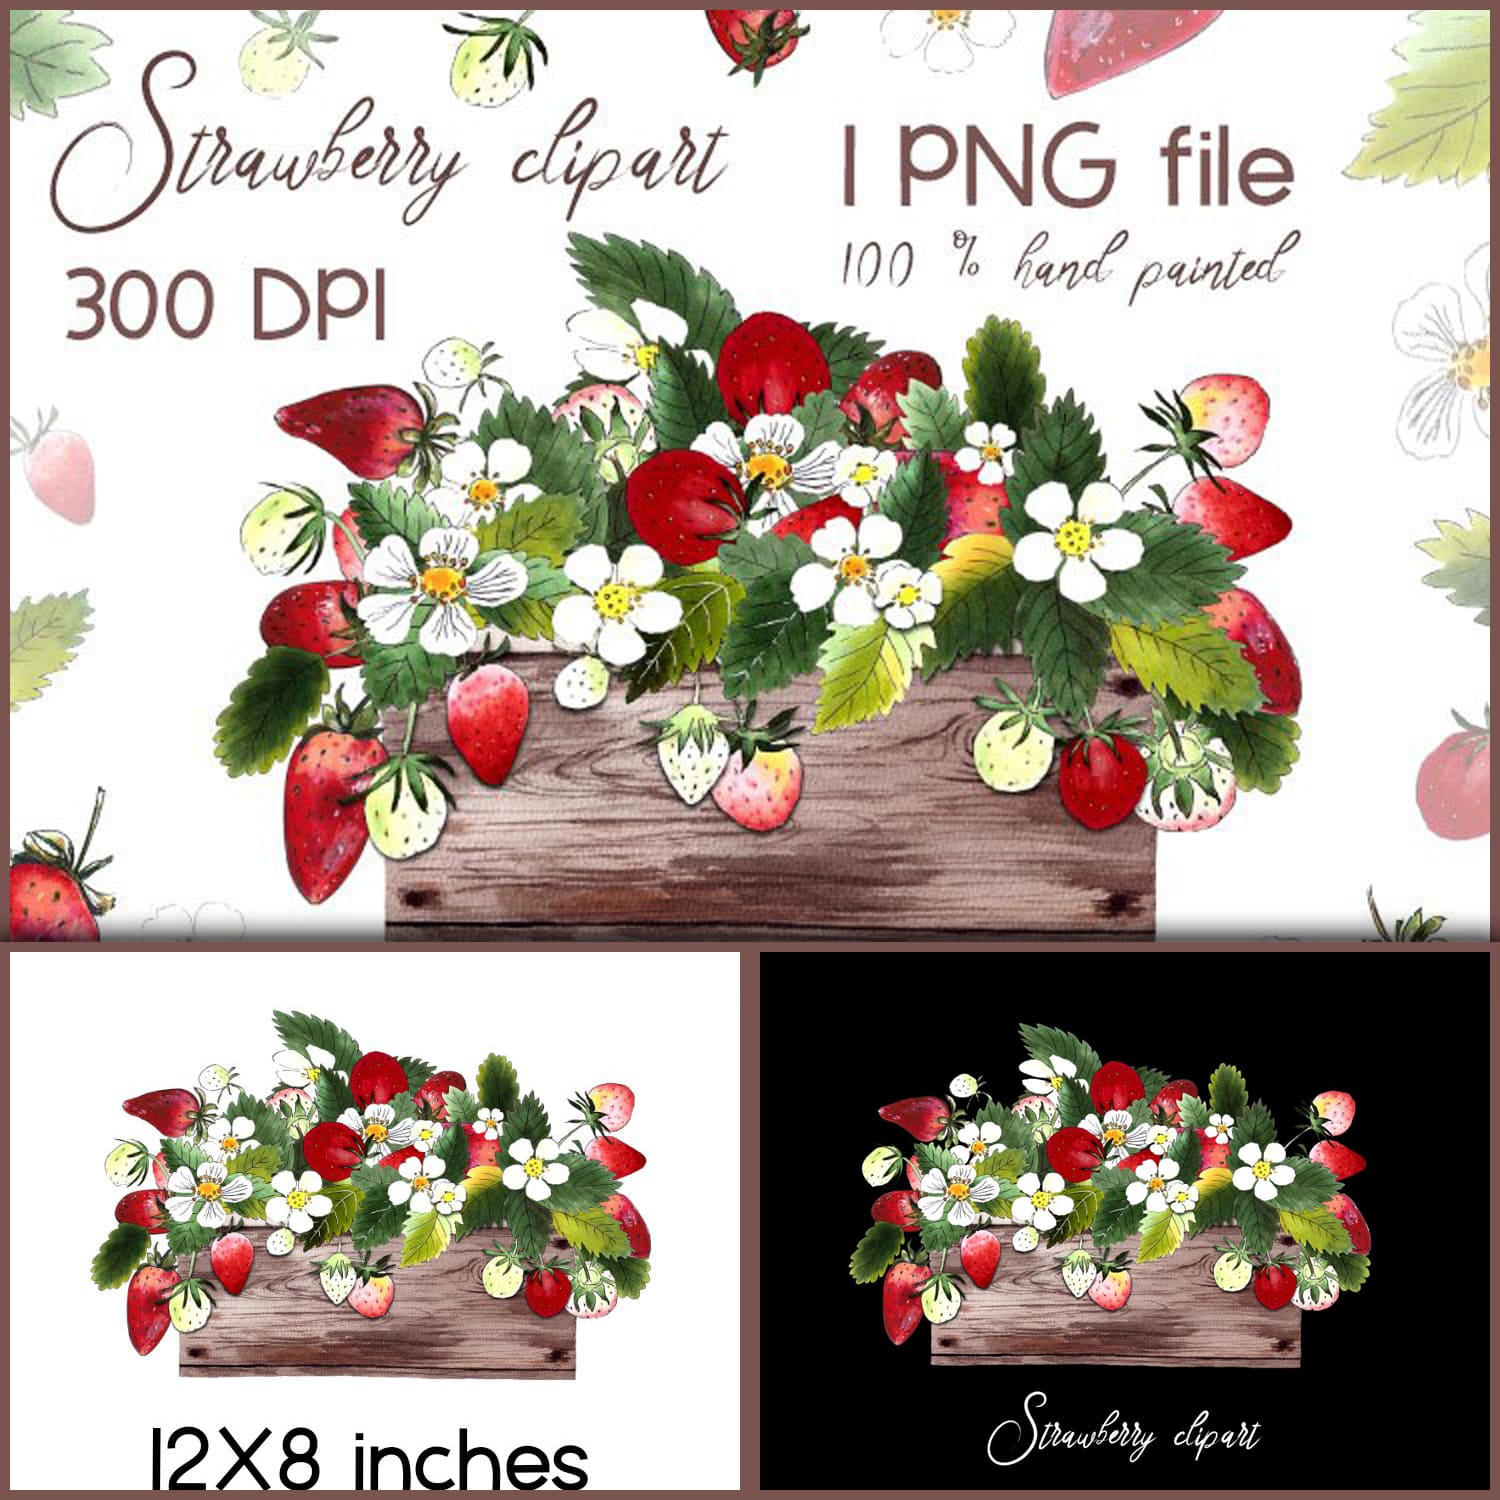 Strawberry Clipart - main image preview.